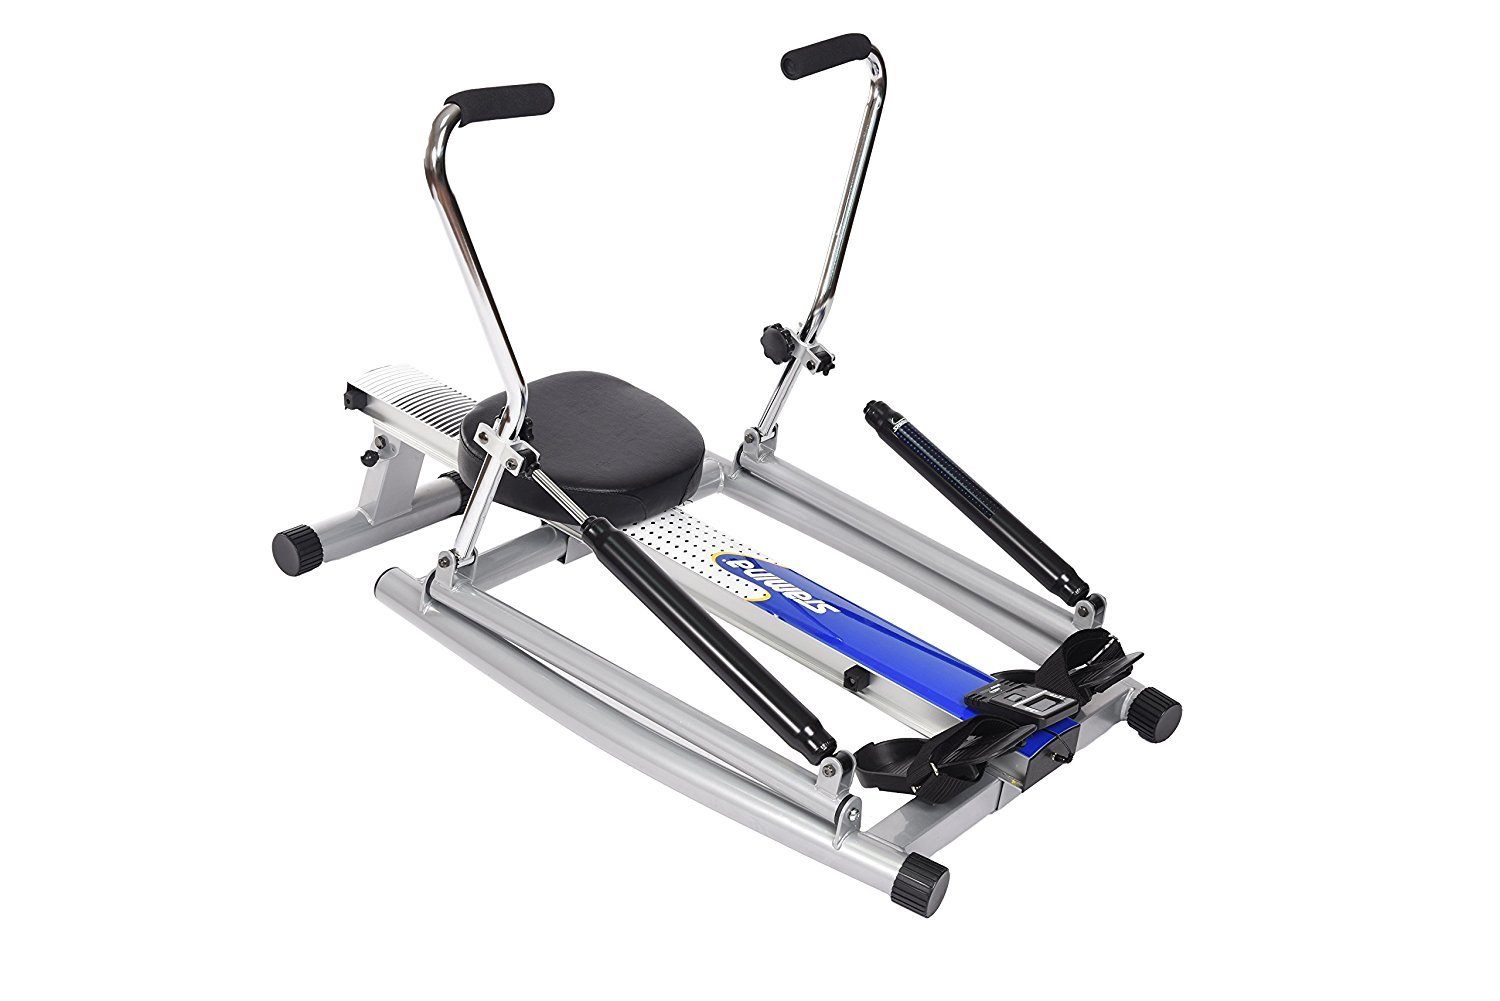 the Stamina 1215 Orbital Rowing Machine with Free Motion Arms is another top rowing machine under $500